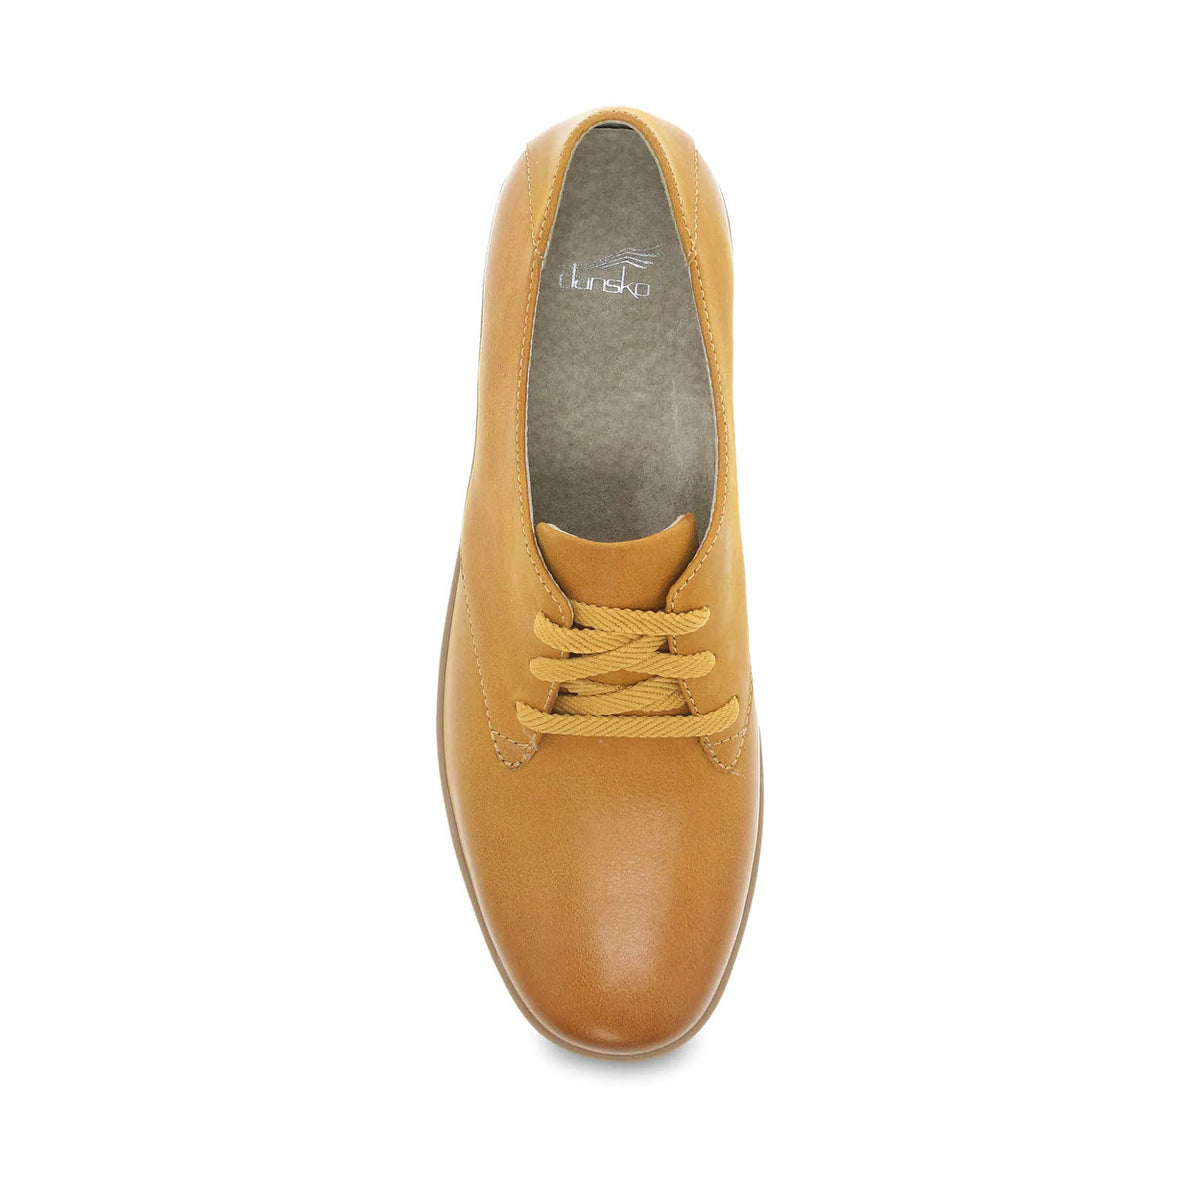 Top view of a single Dansko Libbie Mustard Burnished Oxford shoe with laces on a white background.